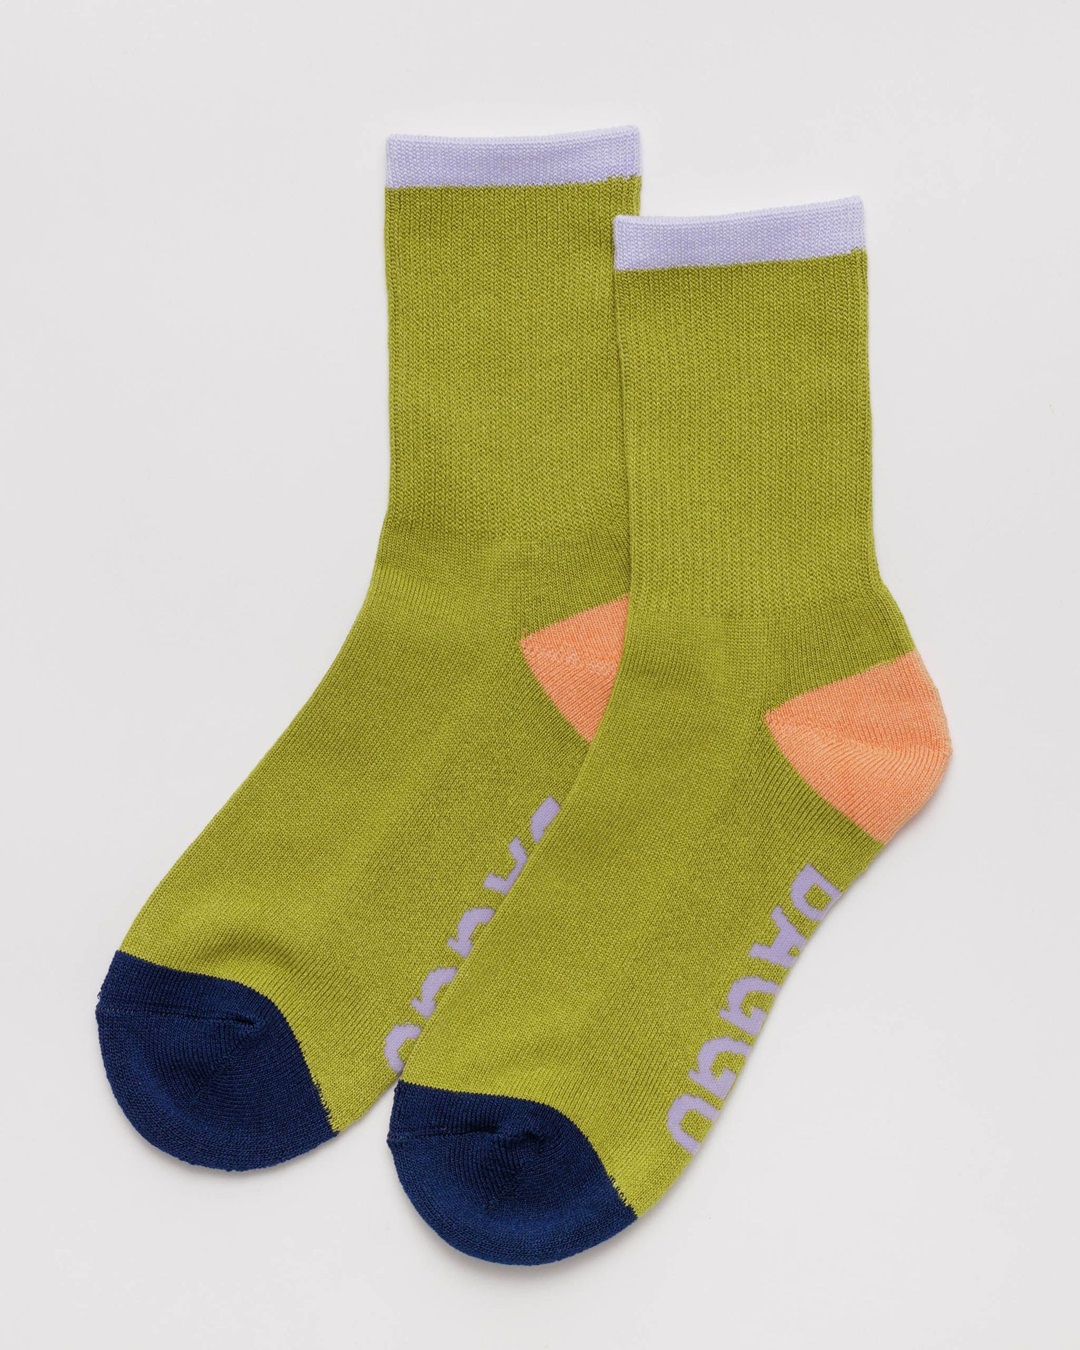 Lemongrass pair of socks with navy blue coloured toes and orange heels